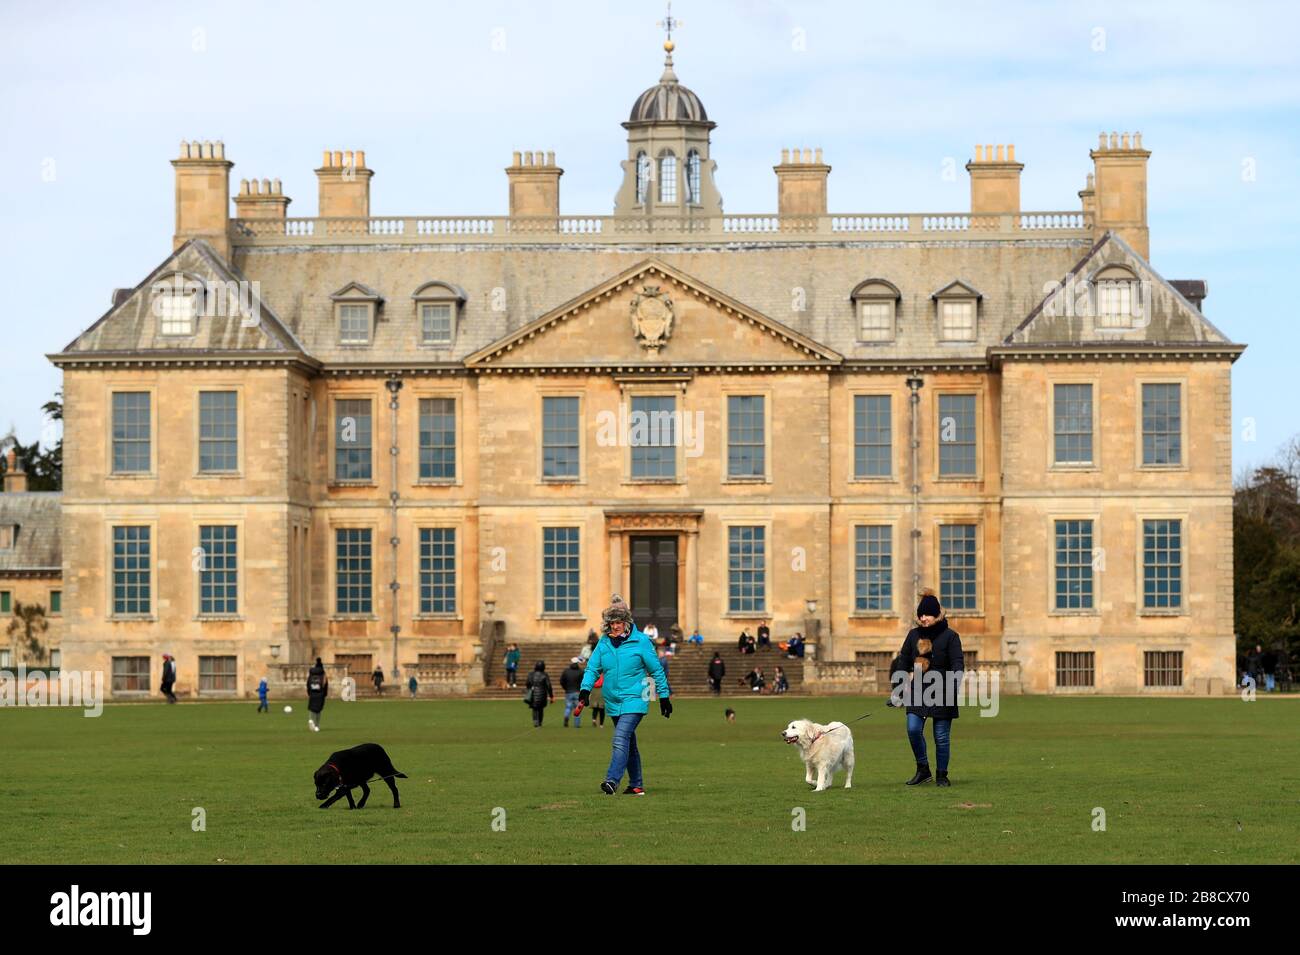 A general view of people waking around the grounds of Belton House in Grantham, which has been opened up free of charge after Boris Johnson ordered pubs, cafes, nightclubs, bars, restaurants, theatres, leisure centres and gyms to close to fight coronavirus. Stock Photo